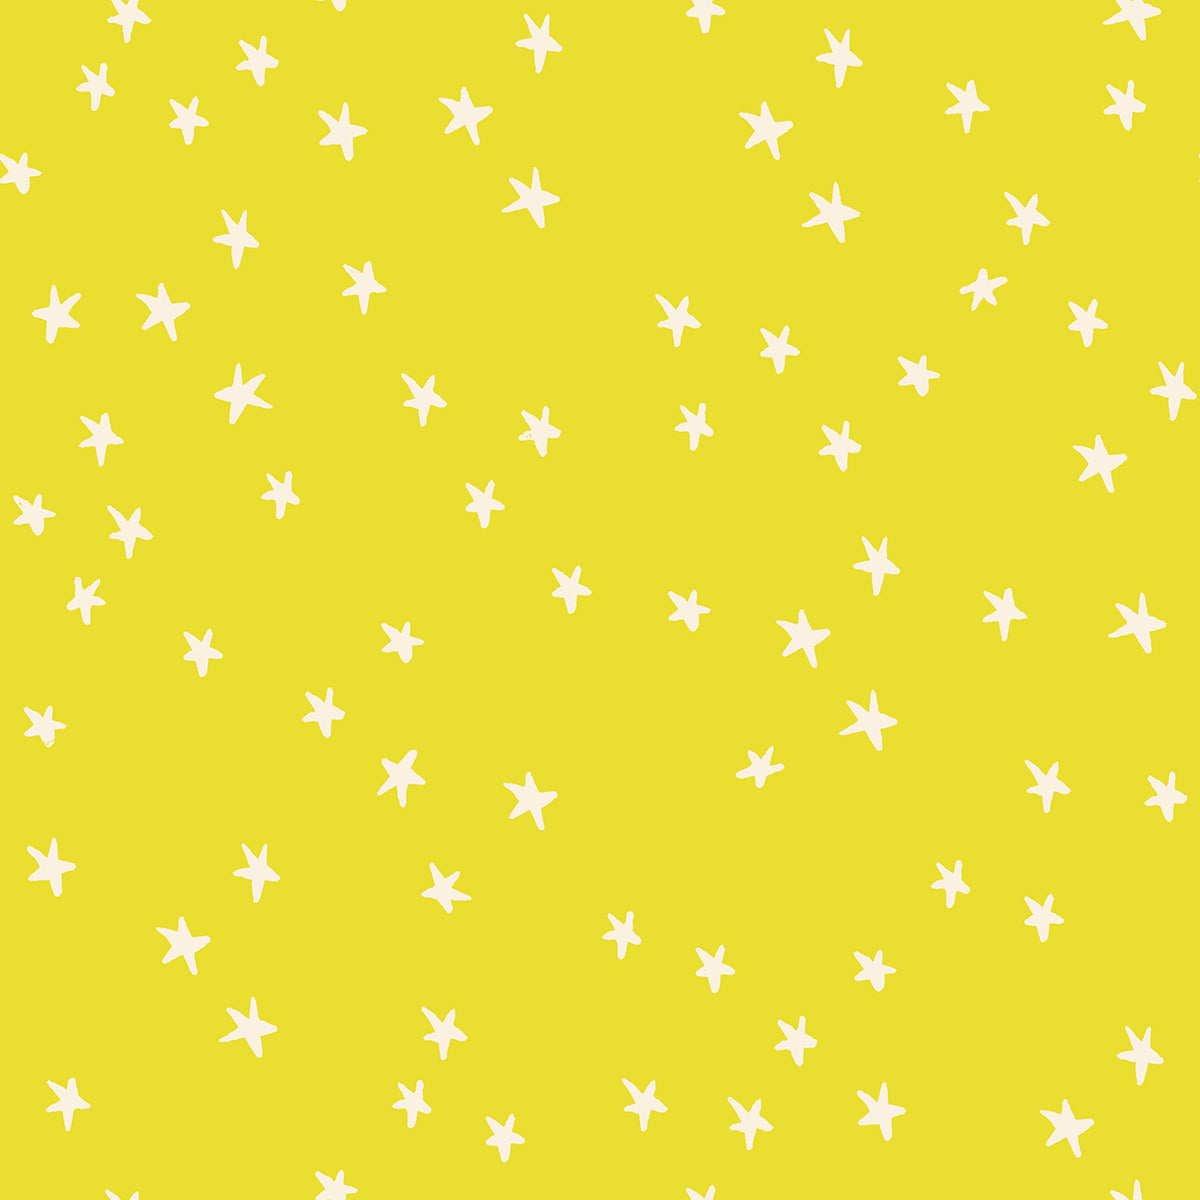 Starry in Citron by Alexia Abegg for Ruby Star Society